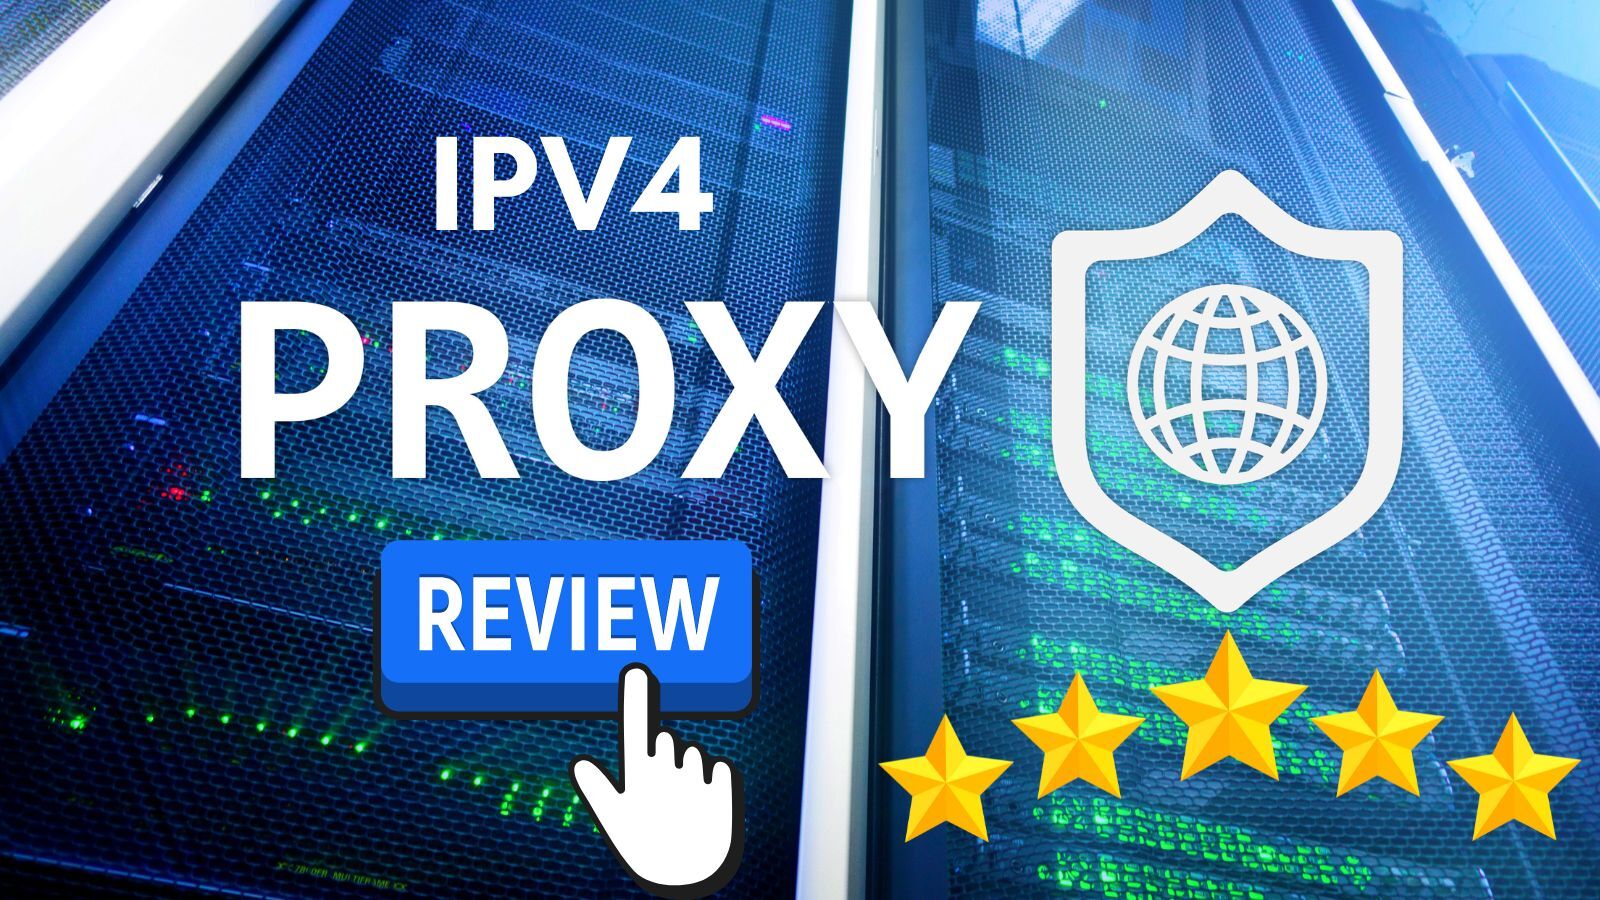 Proxy-IPV4 Review: Is it woth to buy IPV4 & IPV6 Proxies from proxy-ipv4.com?